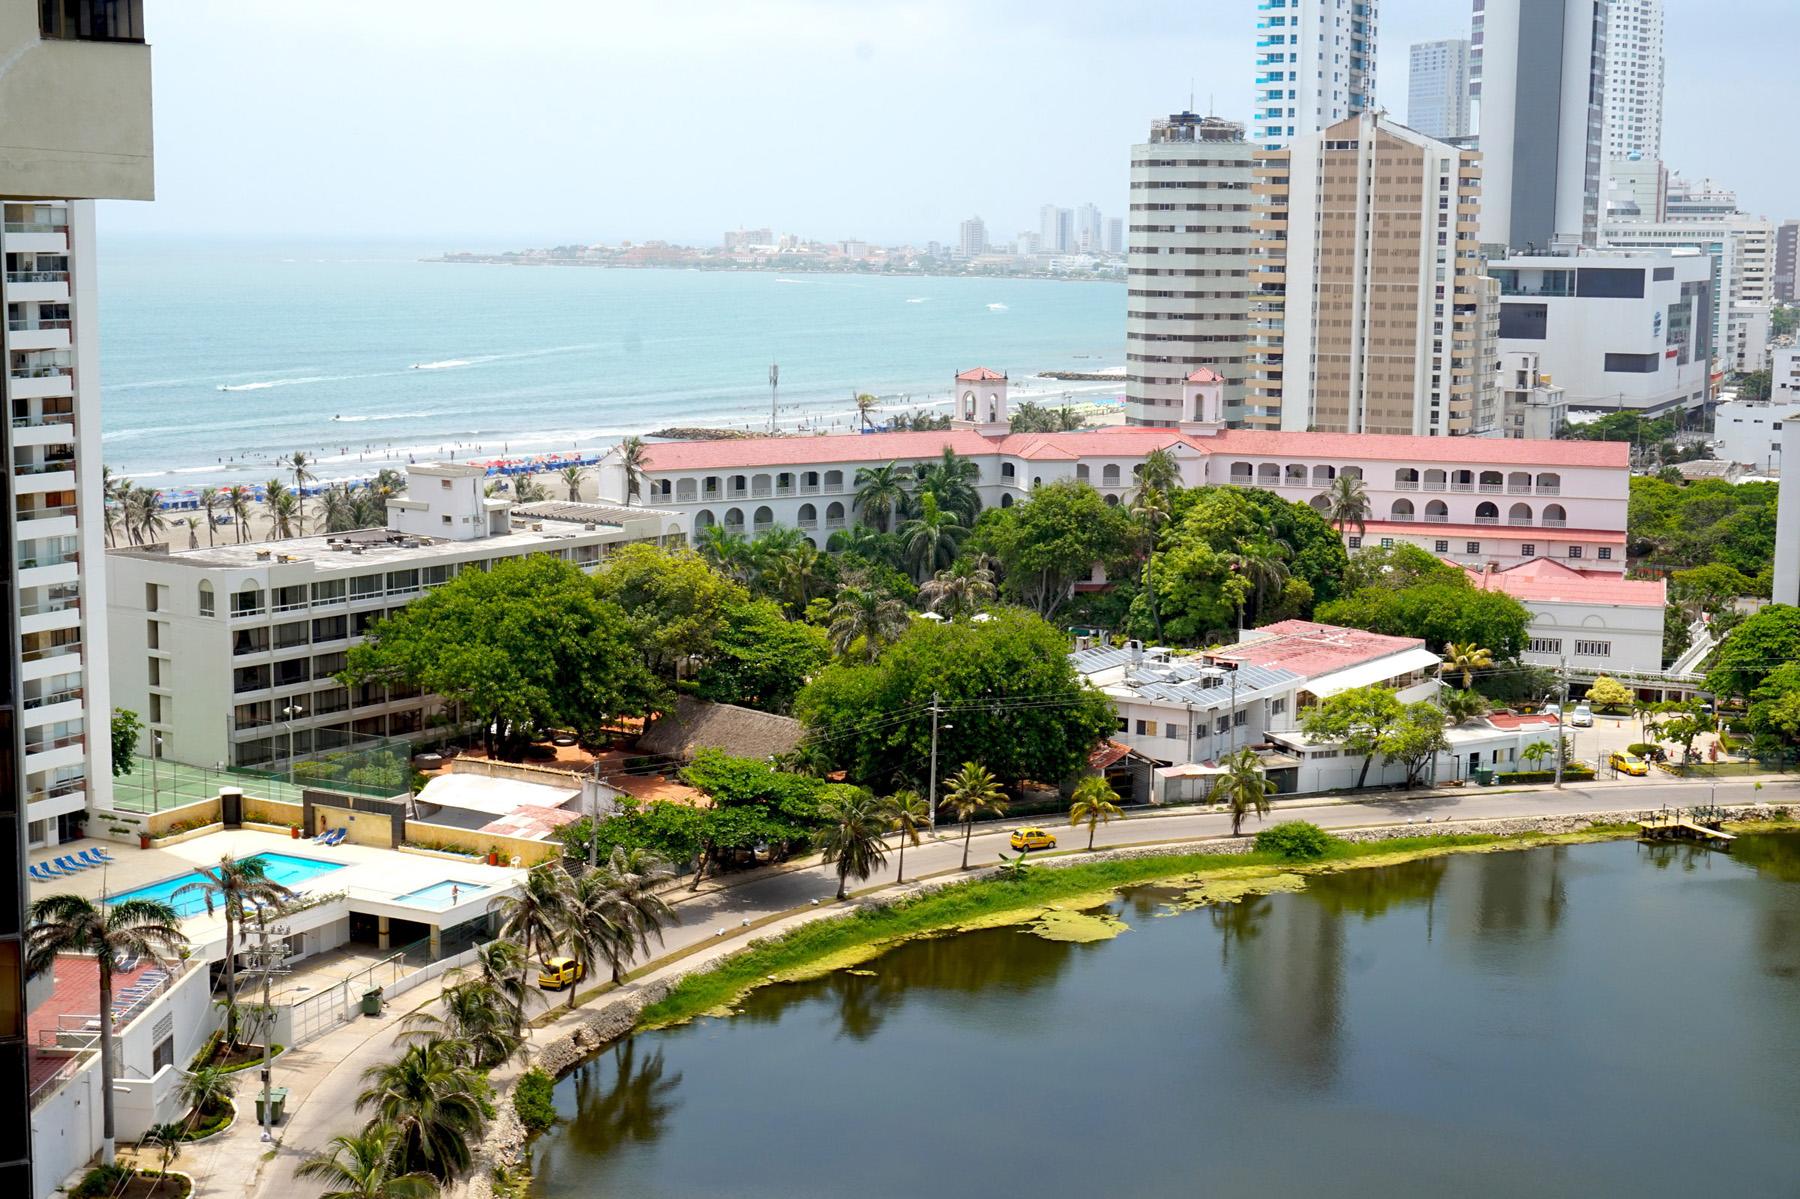 Cartagena de Indias among the 50 Cities you must Visit at least Once in your Life